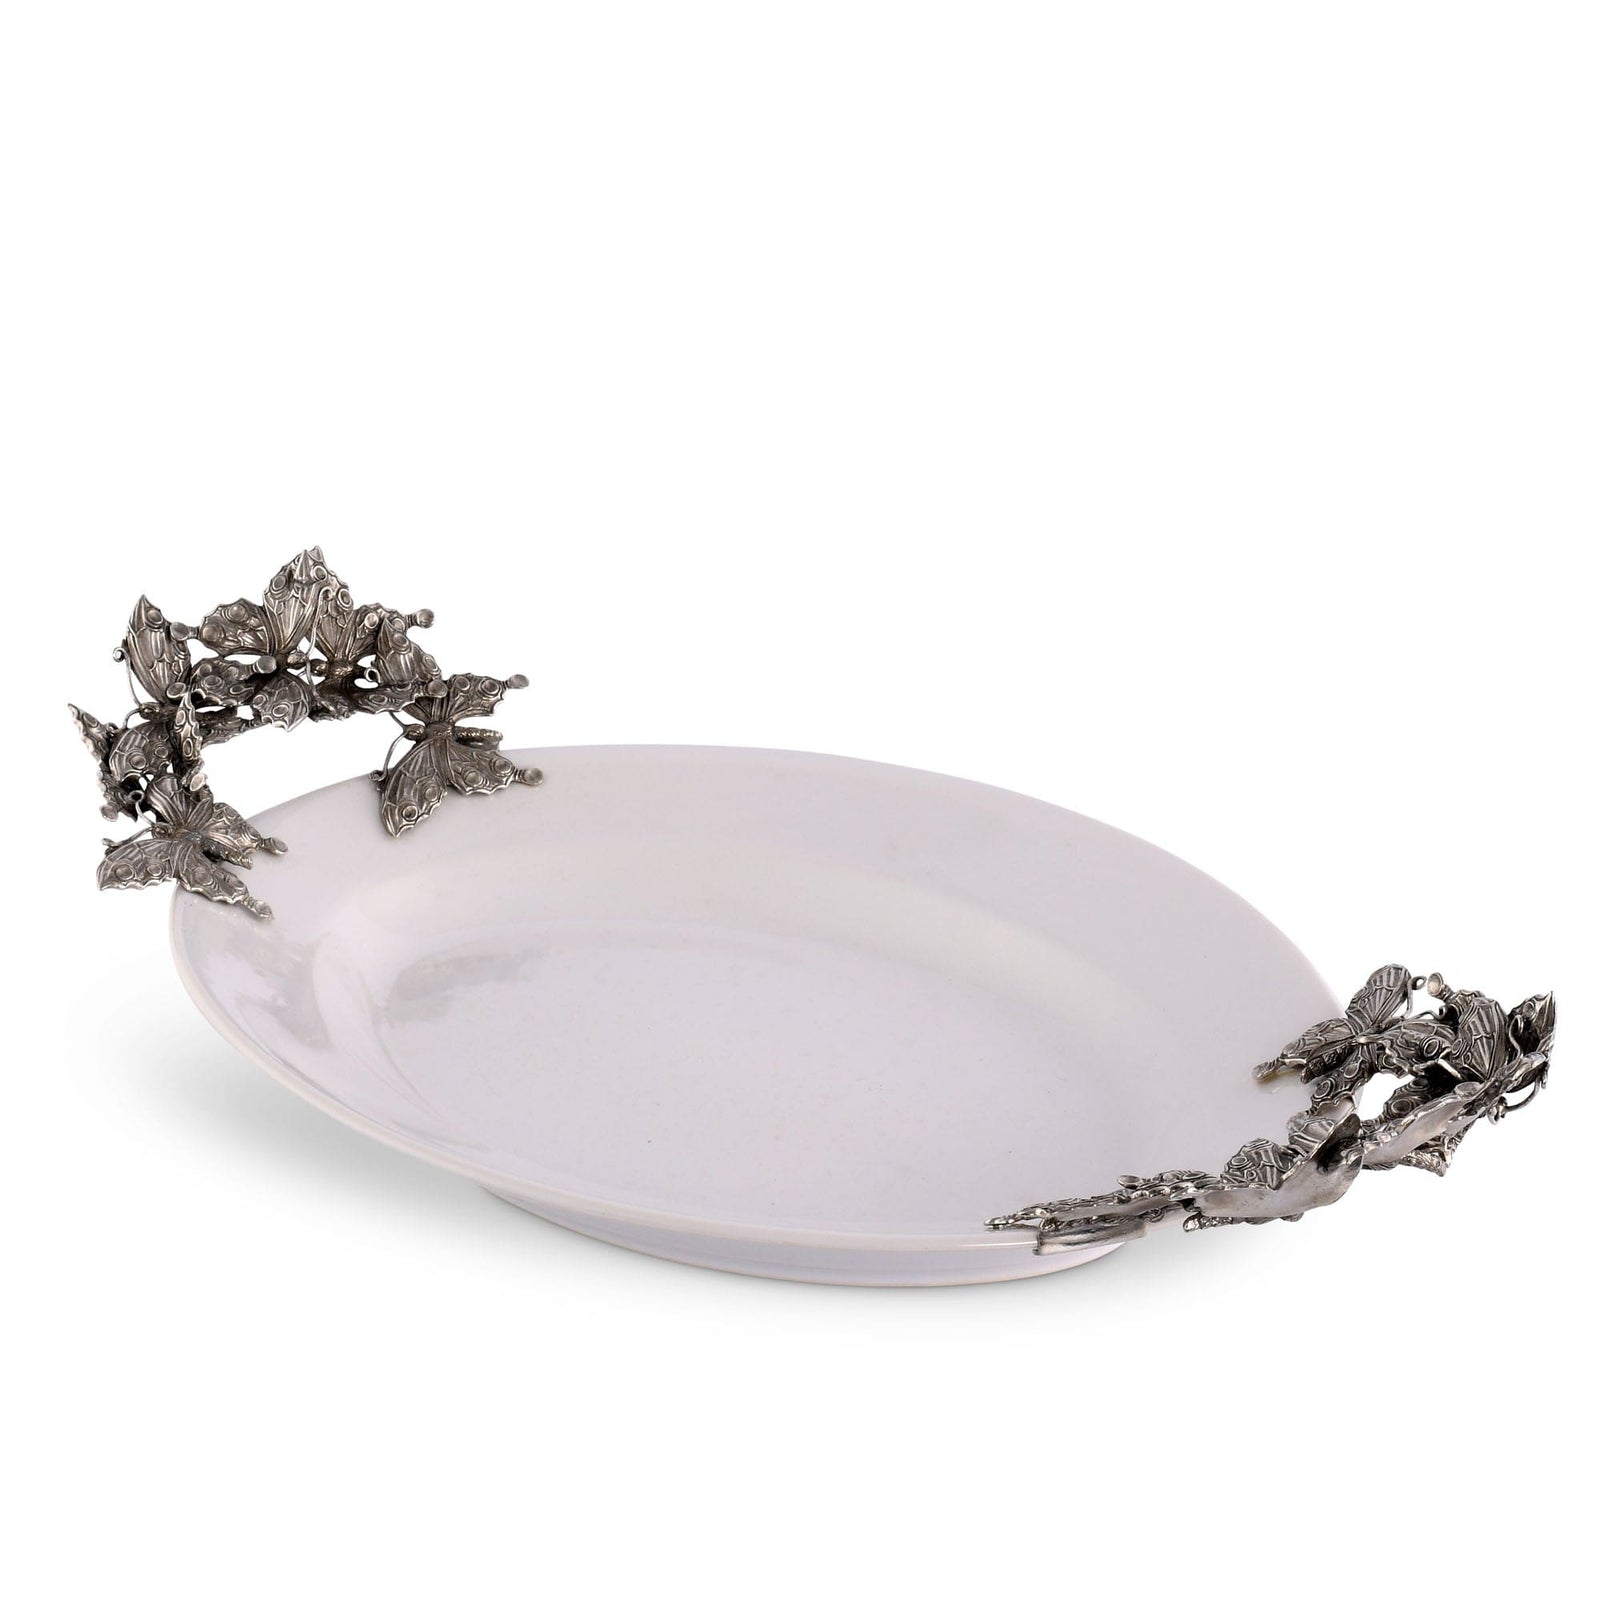 Vagabond House Handcrafted Pewter Tableware